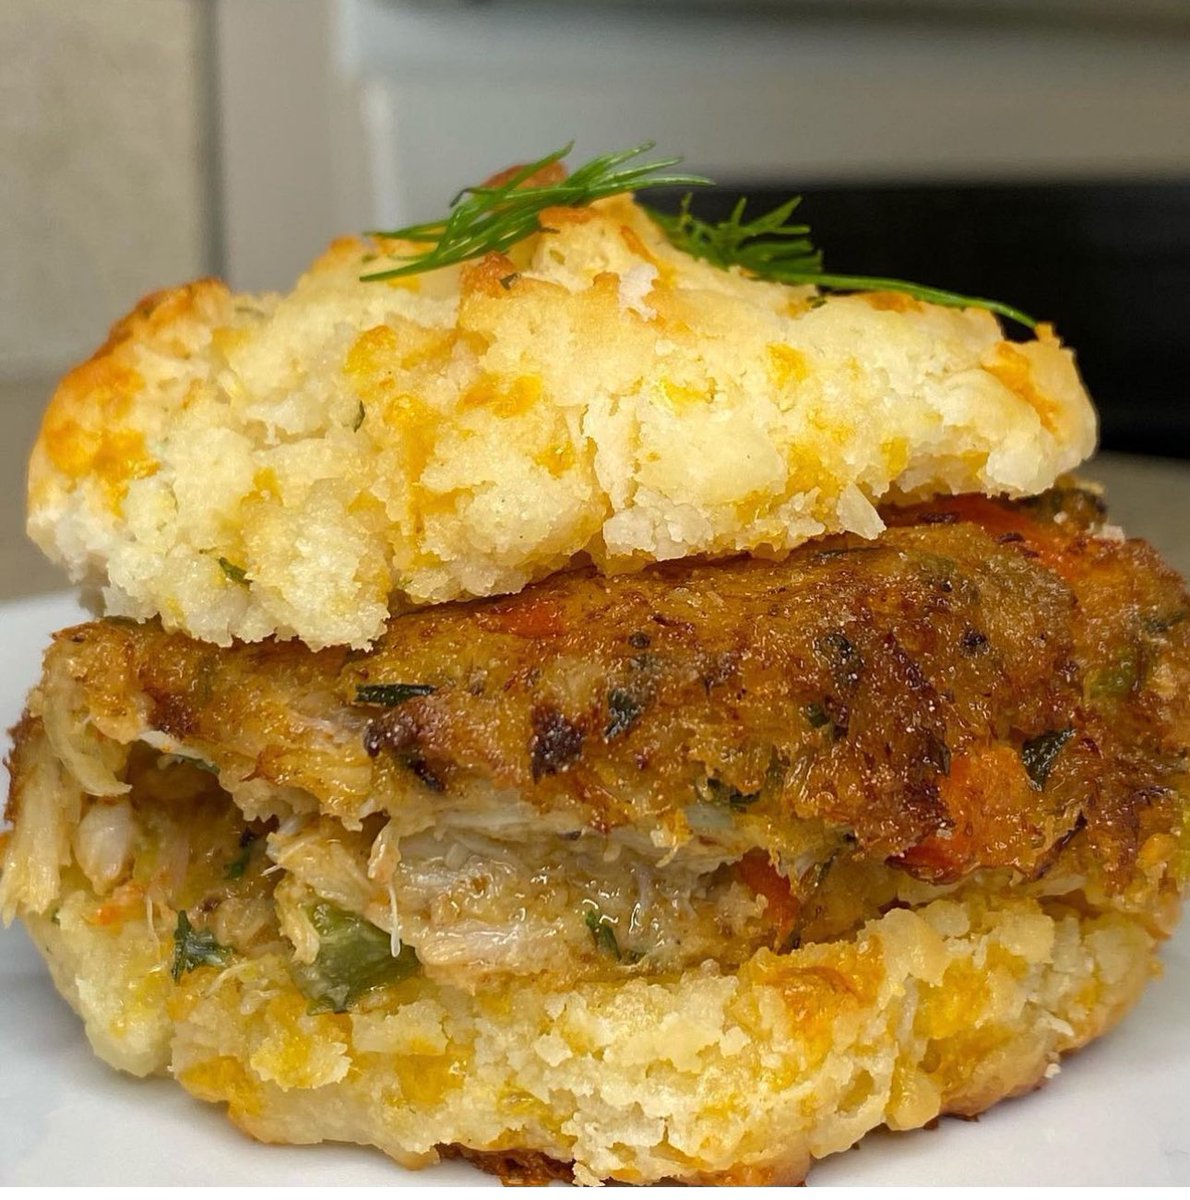 Crab cake between a Red Lobster Cheddar Biscuit